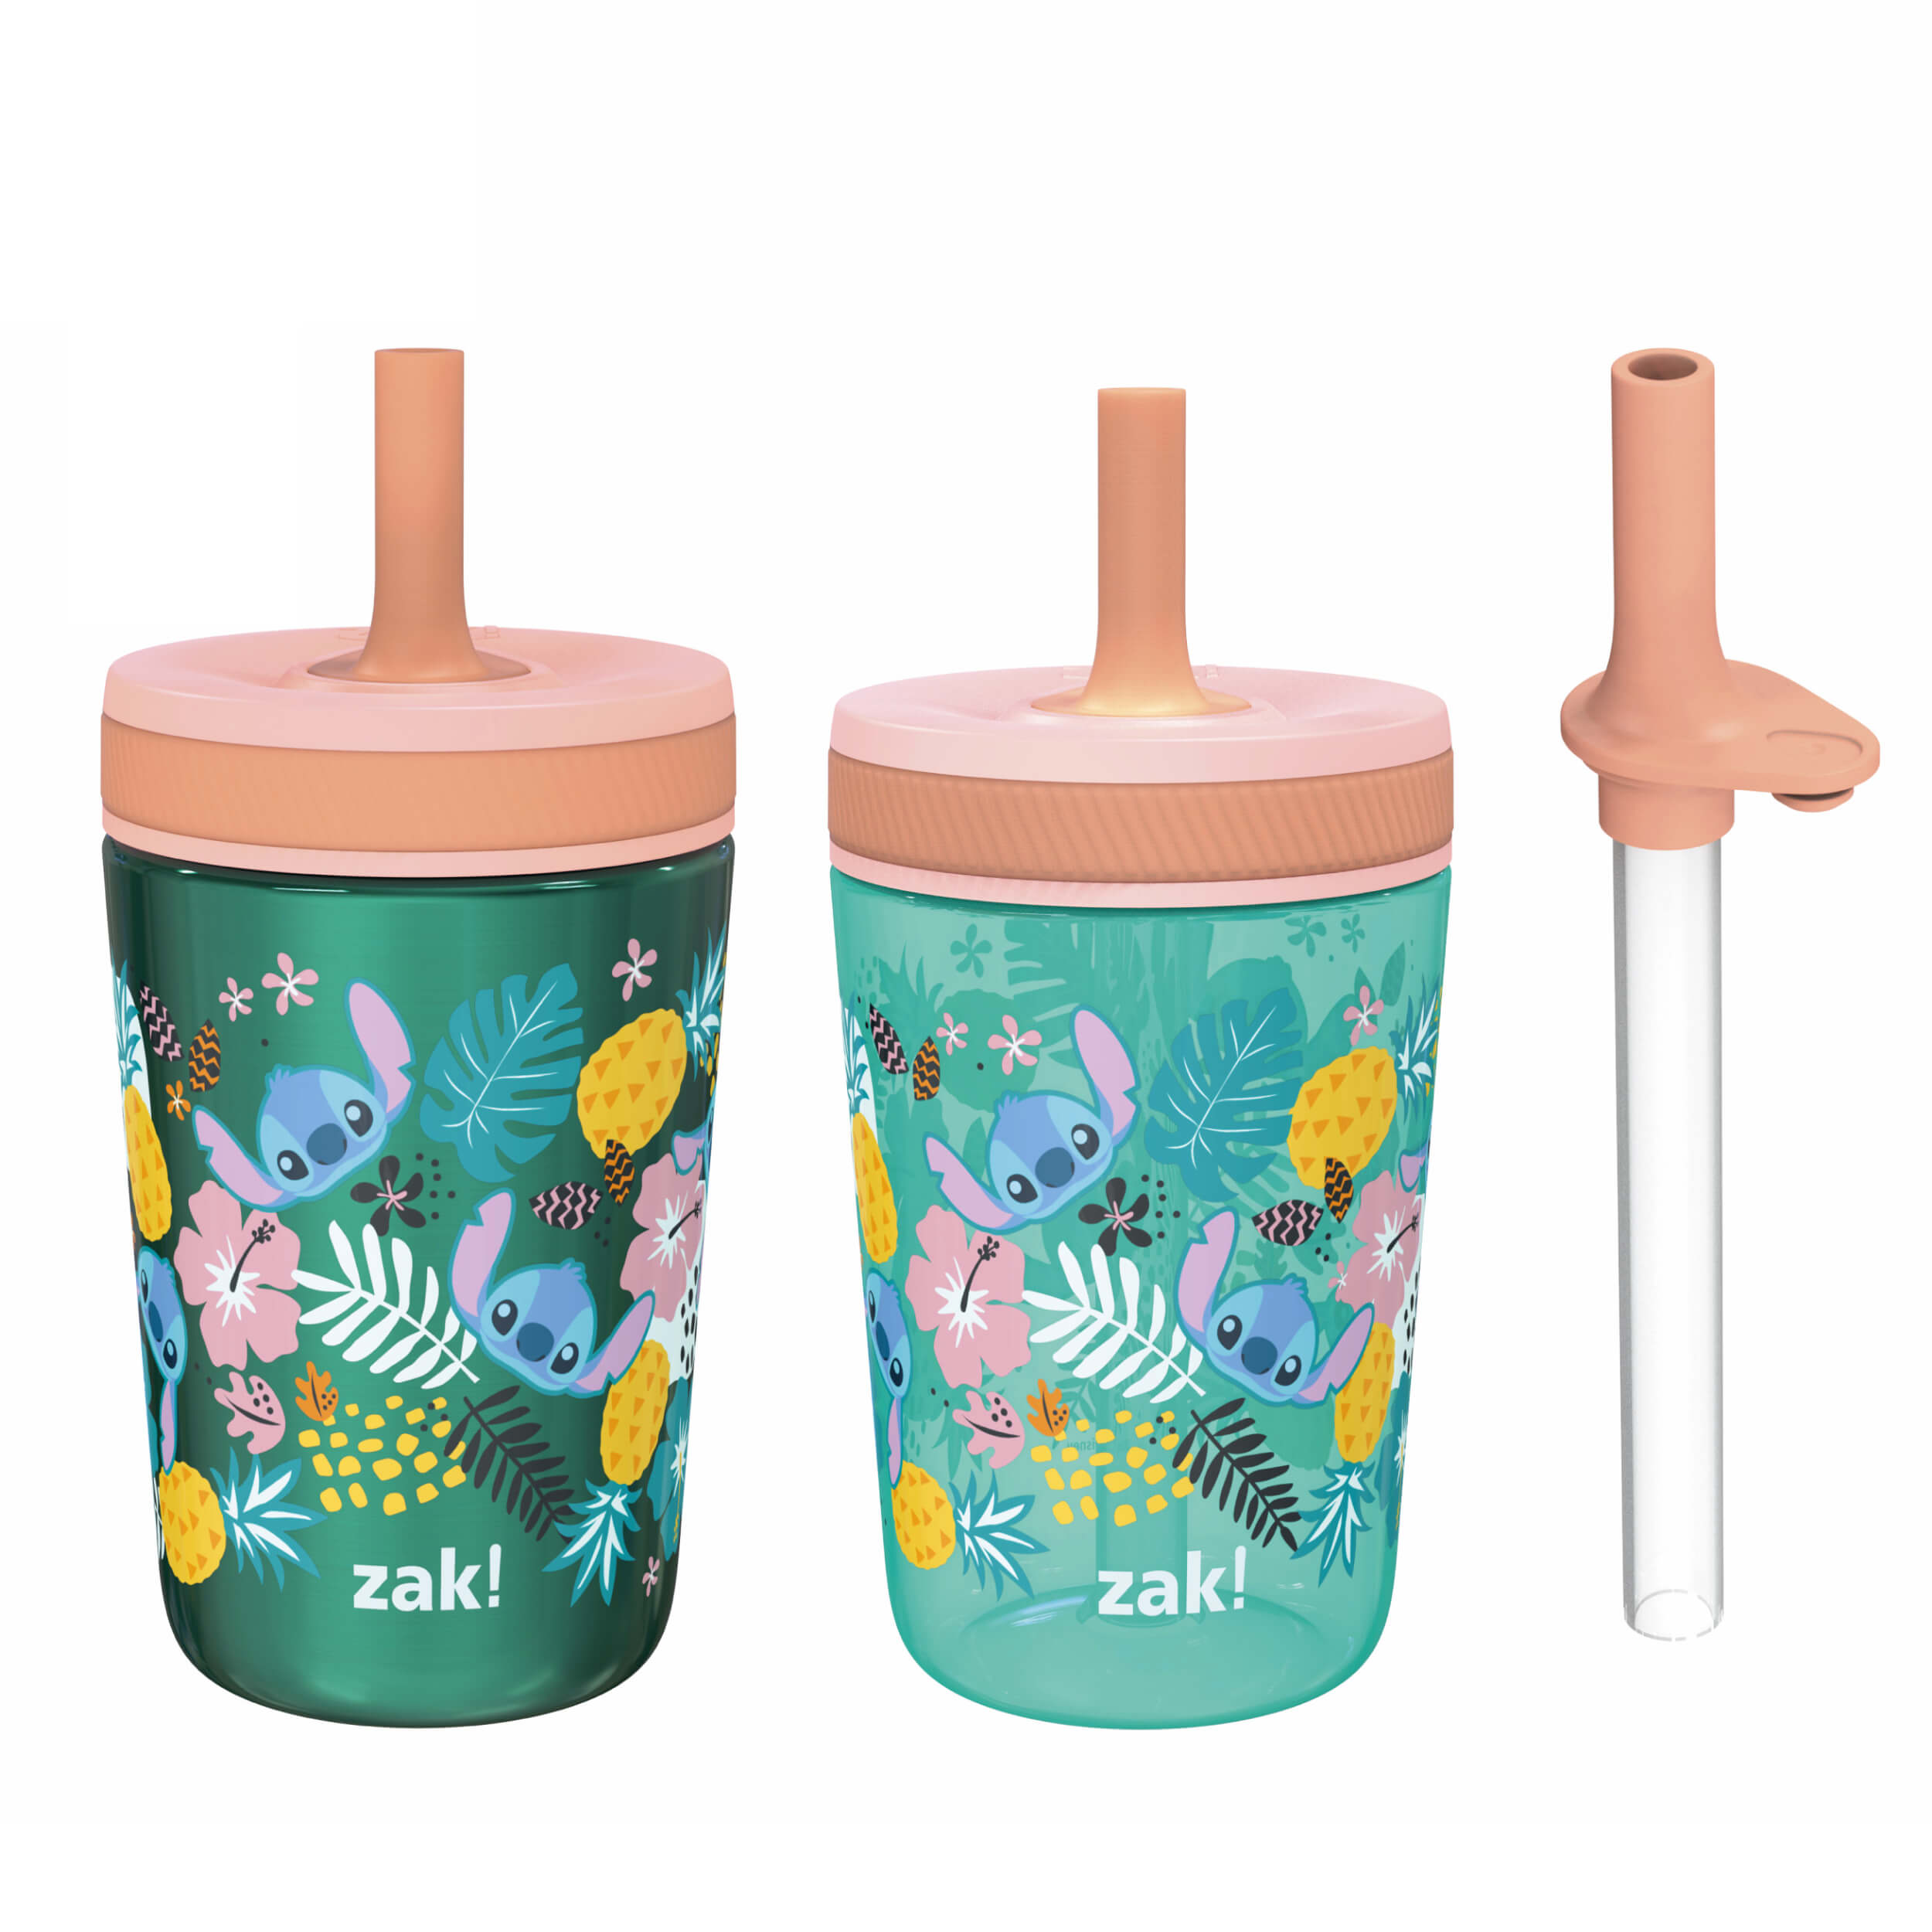 Replying to @its.slimshaedy Here's my hack for the Zak straw cup to ma, Cup With Straw